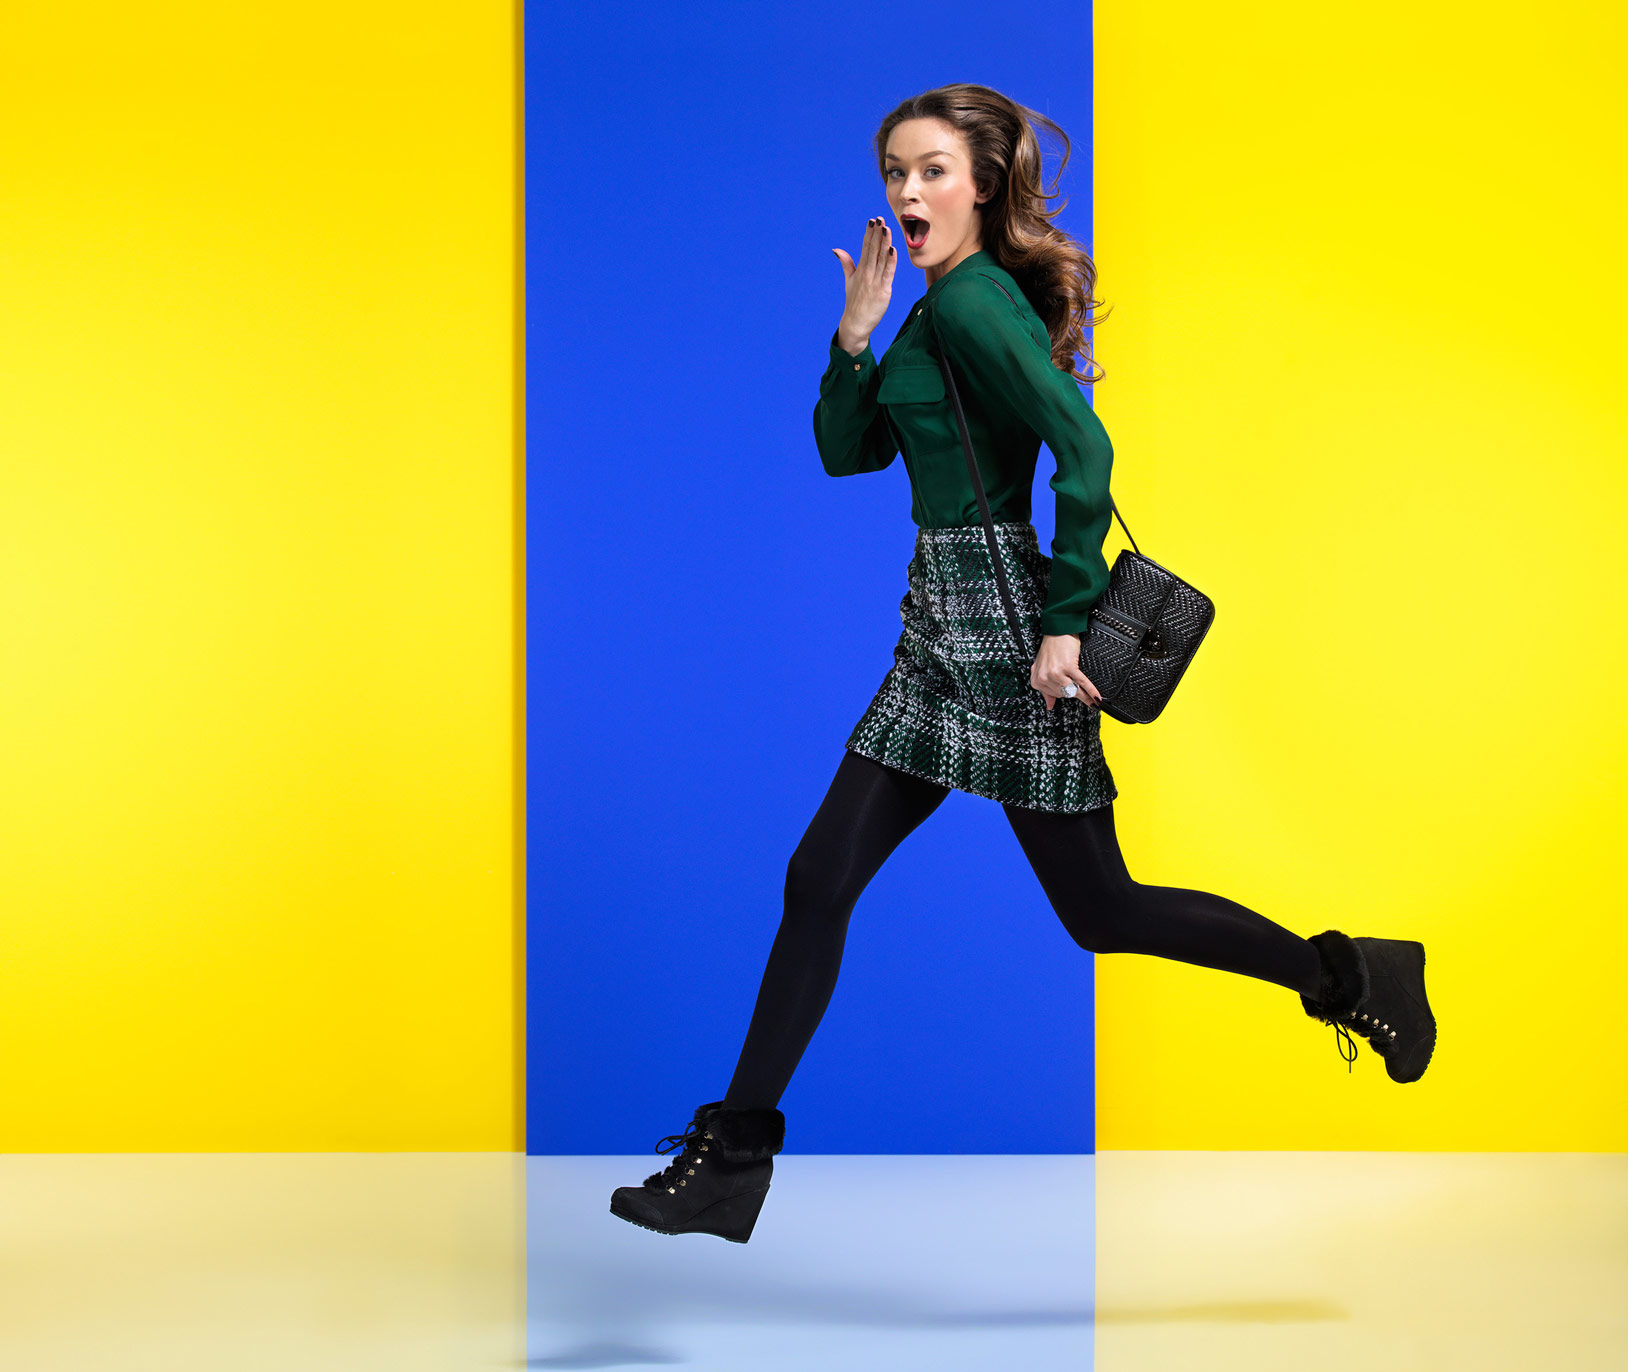 Model running against yellow and blue background